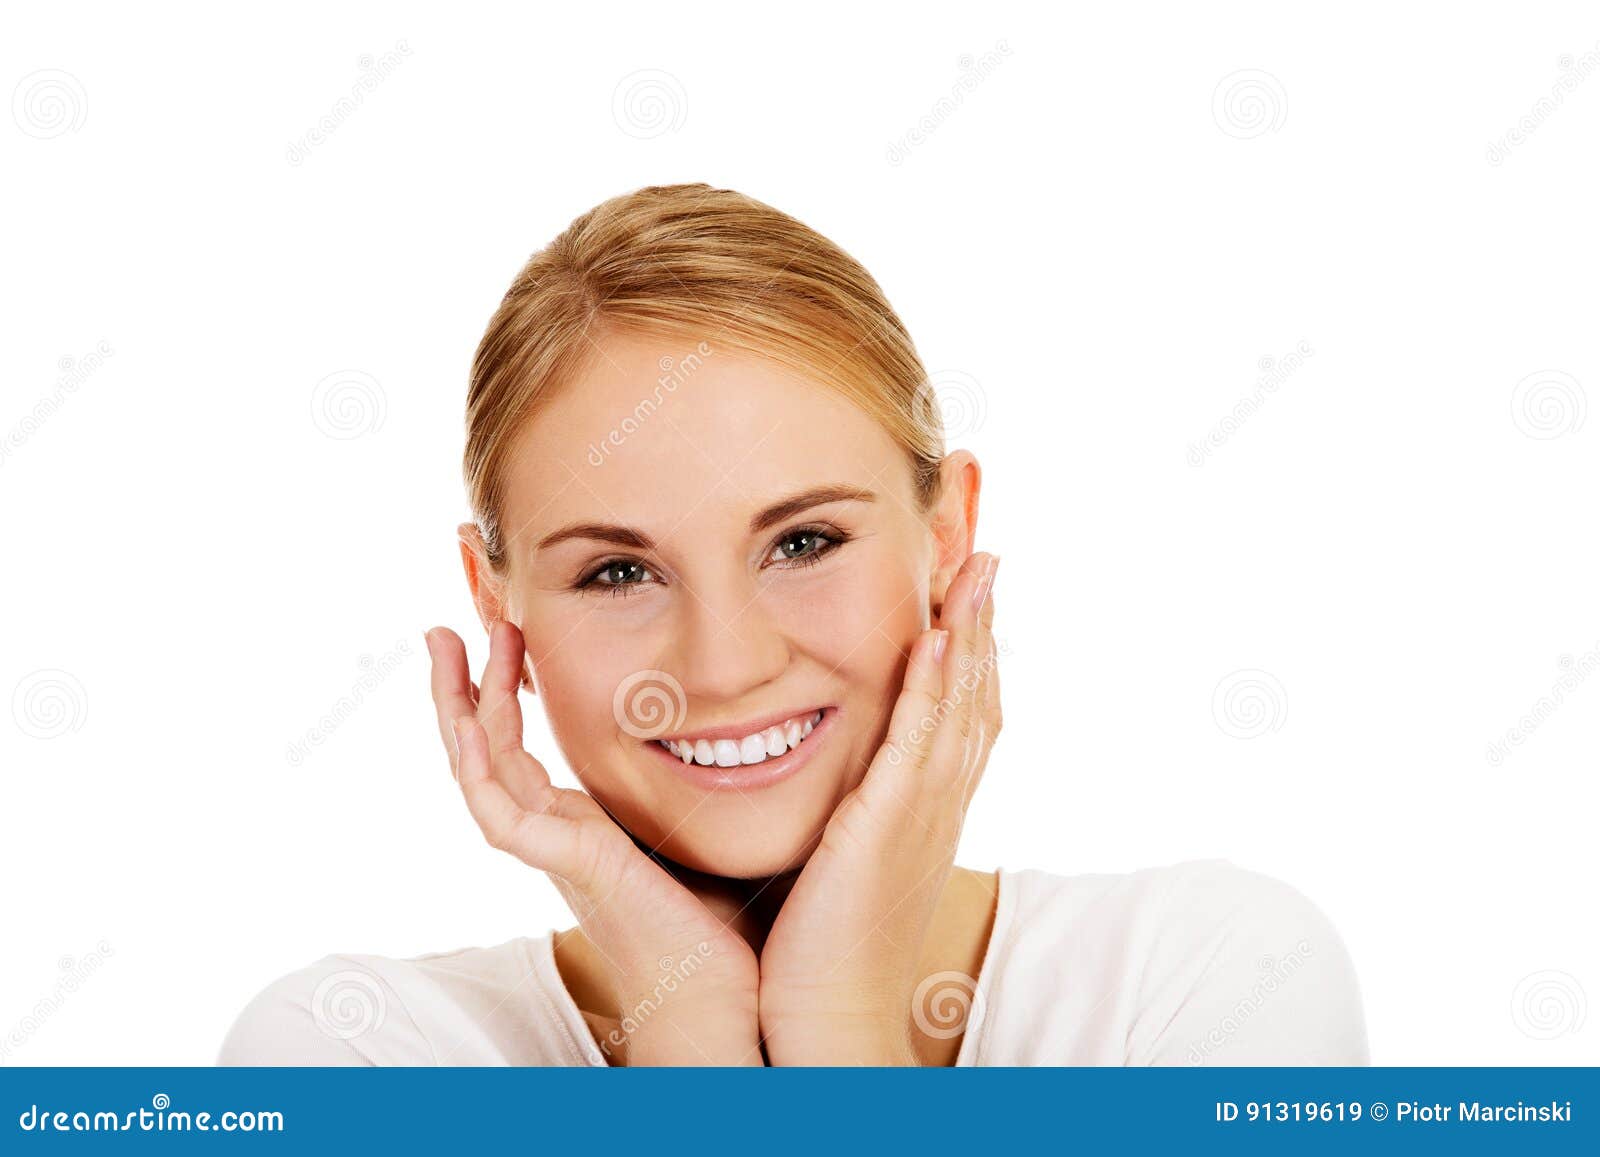 Young Happy Woman Holding Both Hands On Cheeks Stock Image Image Of